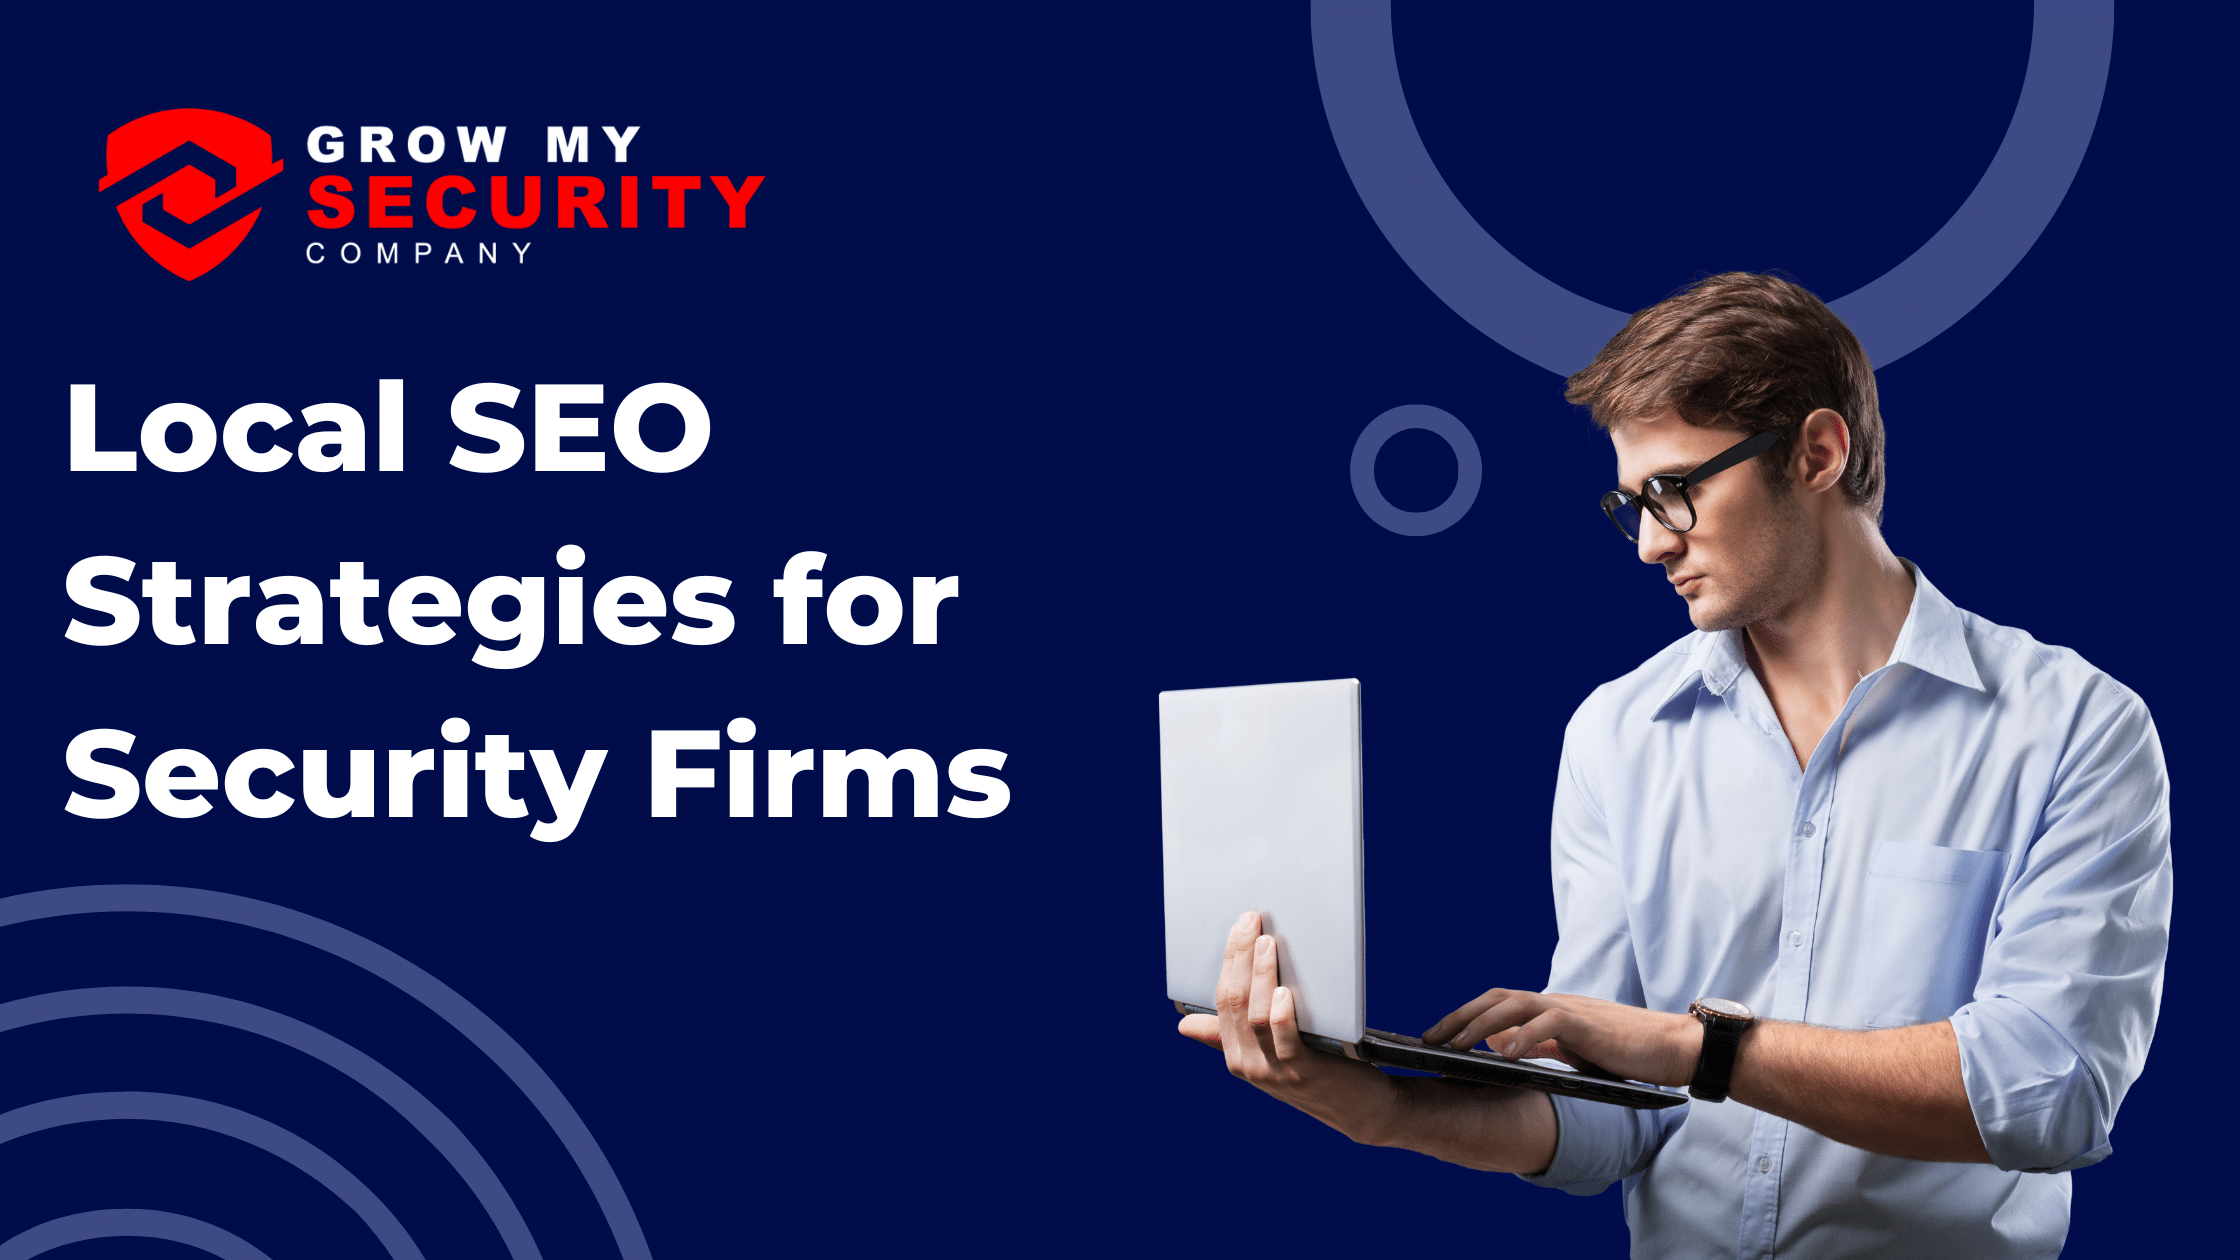 "Local SEO Strategies for Security Firms - Unlocking Growth"